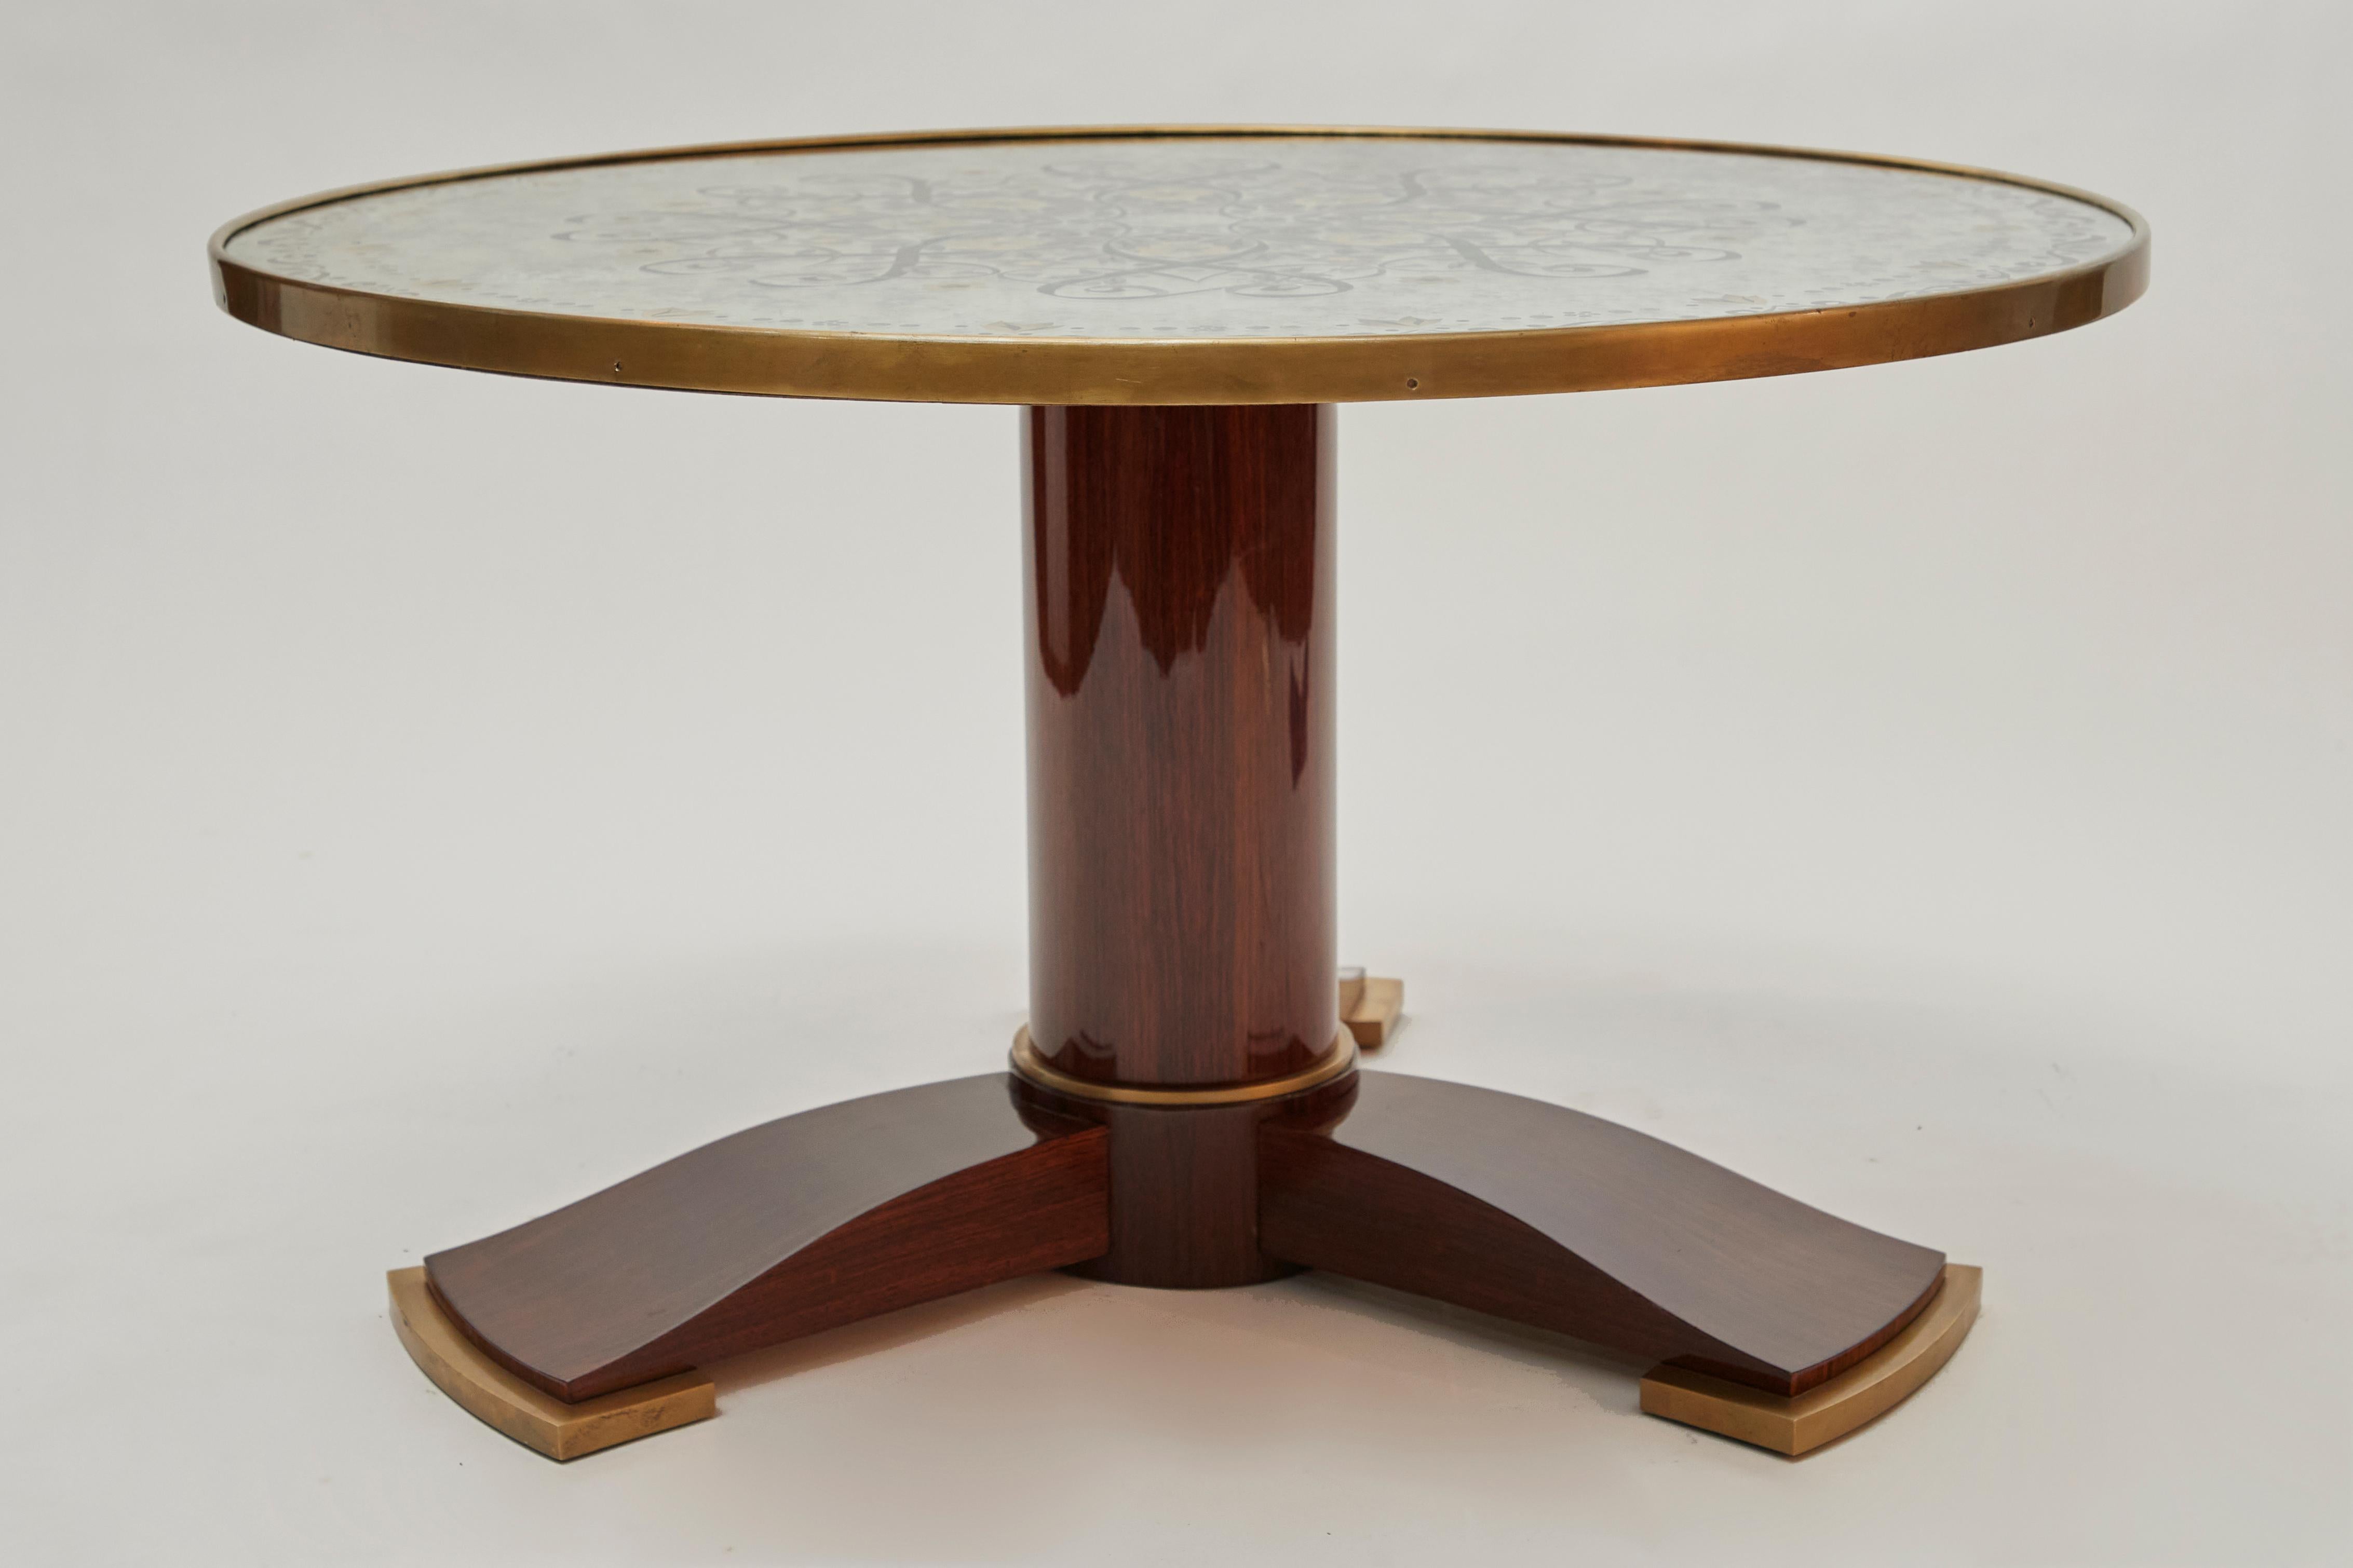 This extraordinary table, designed by one of the early 20th century's greatest designers, represents the consummation of French Art Deco elegance. The table's circular top--a spectacular work of verre eglomise set like a jewel in a frame of gilt